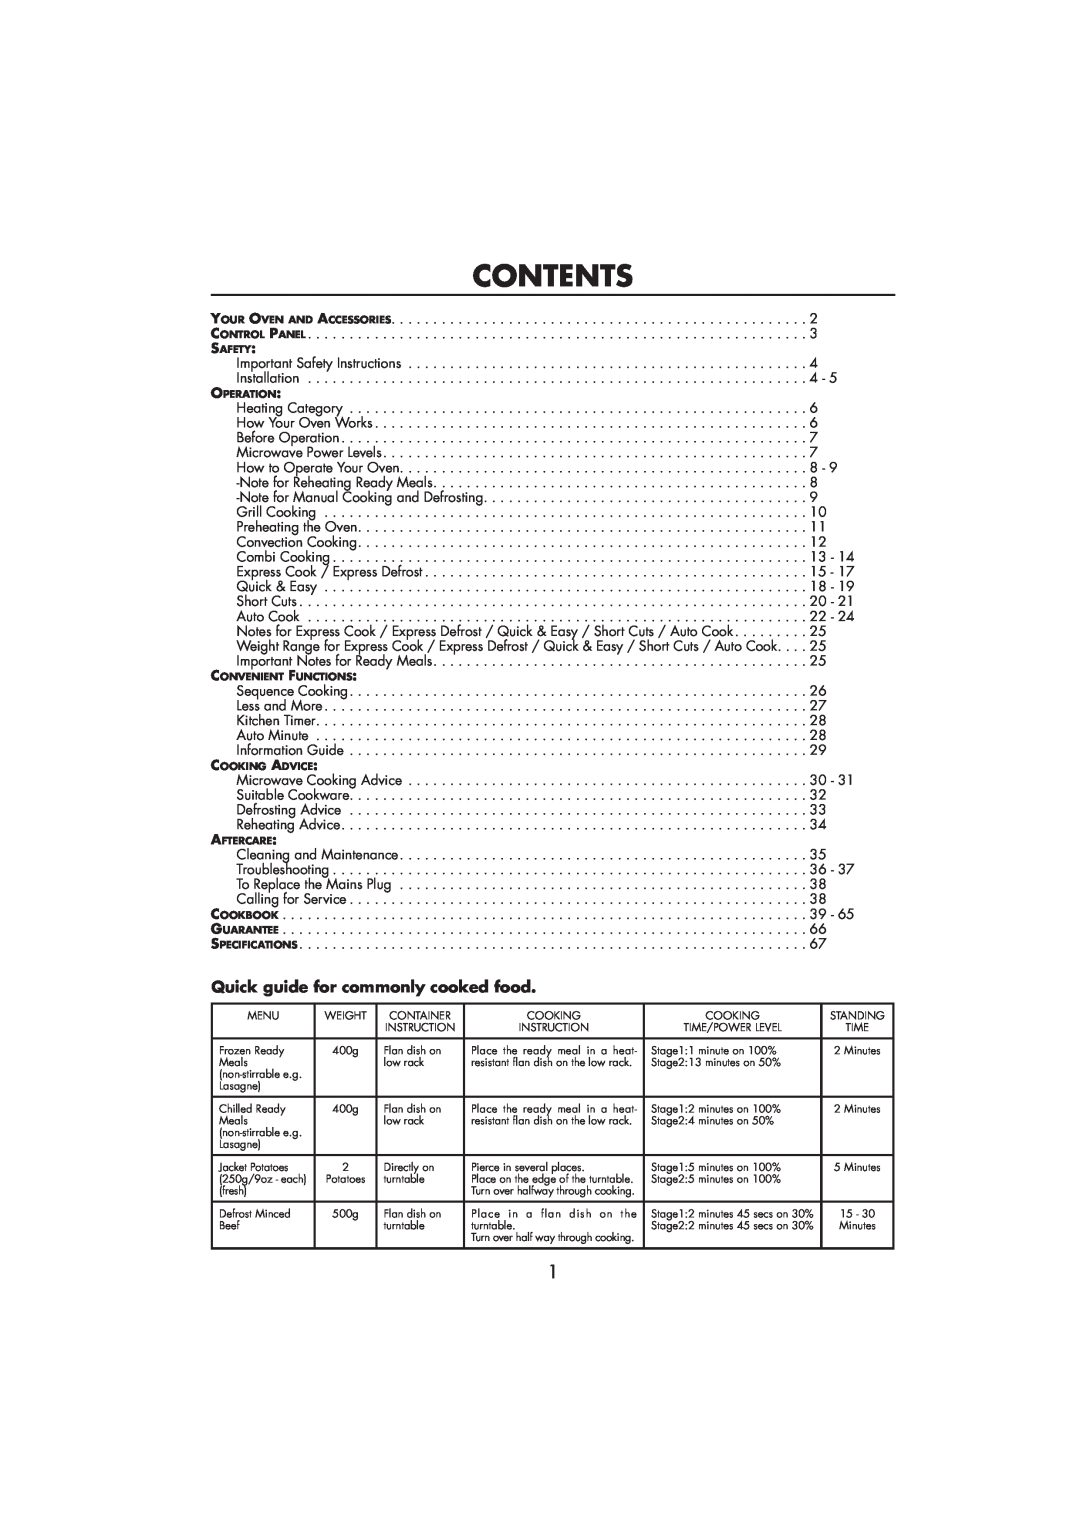 Sharp R-890SLM operation manual Contents, Quick guide for commonly cooked food 